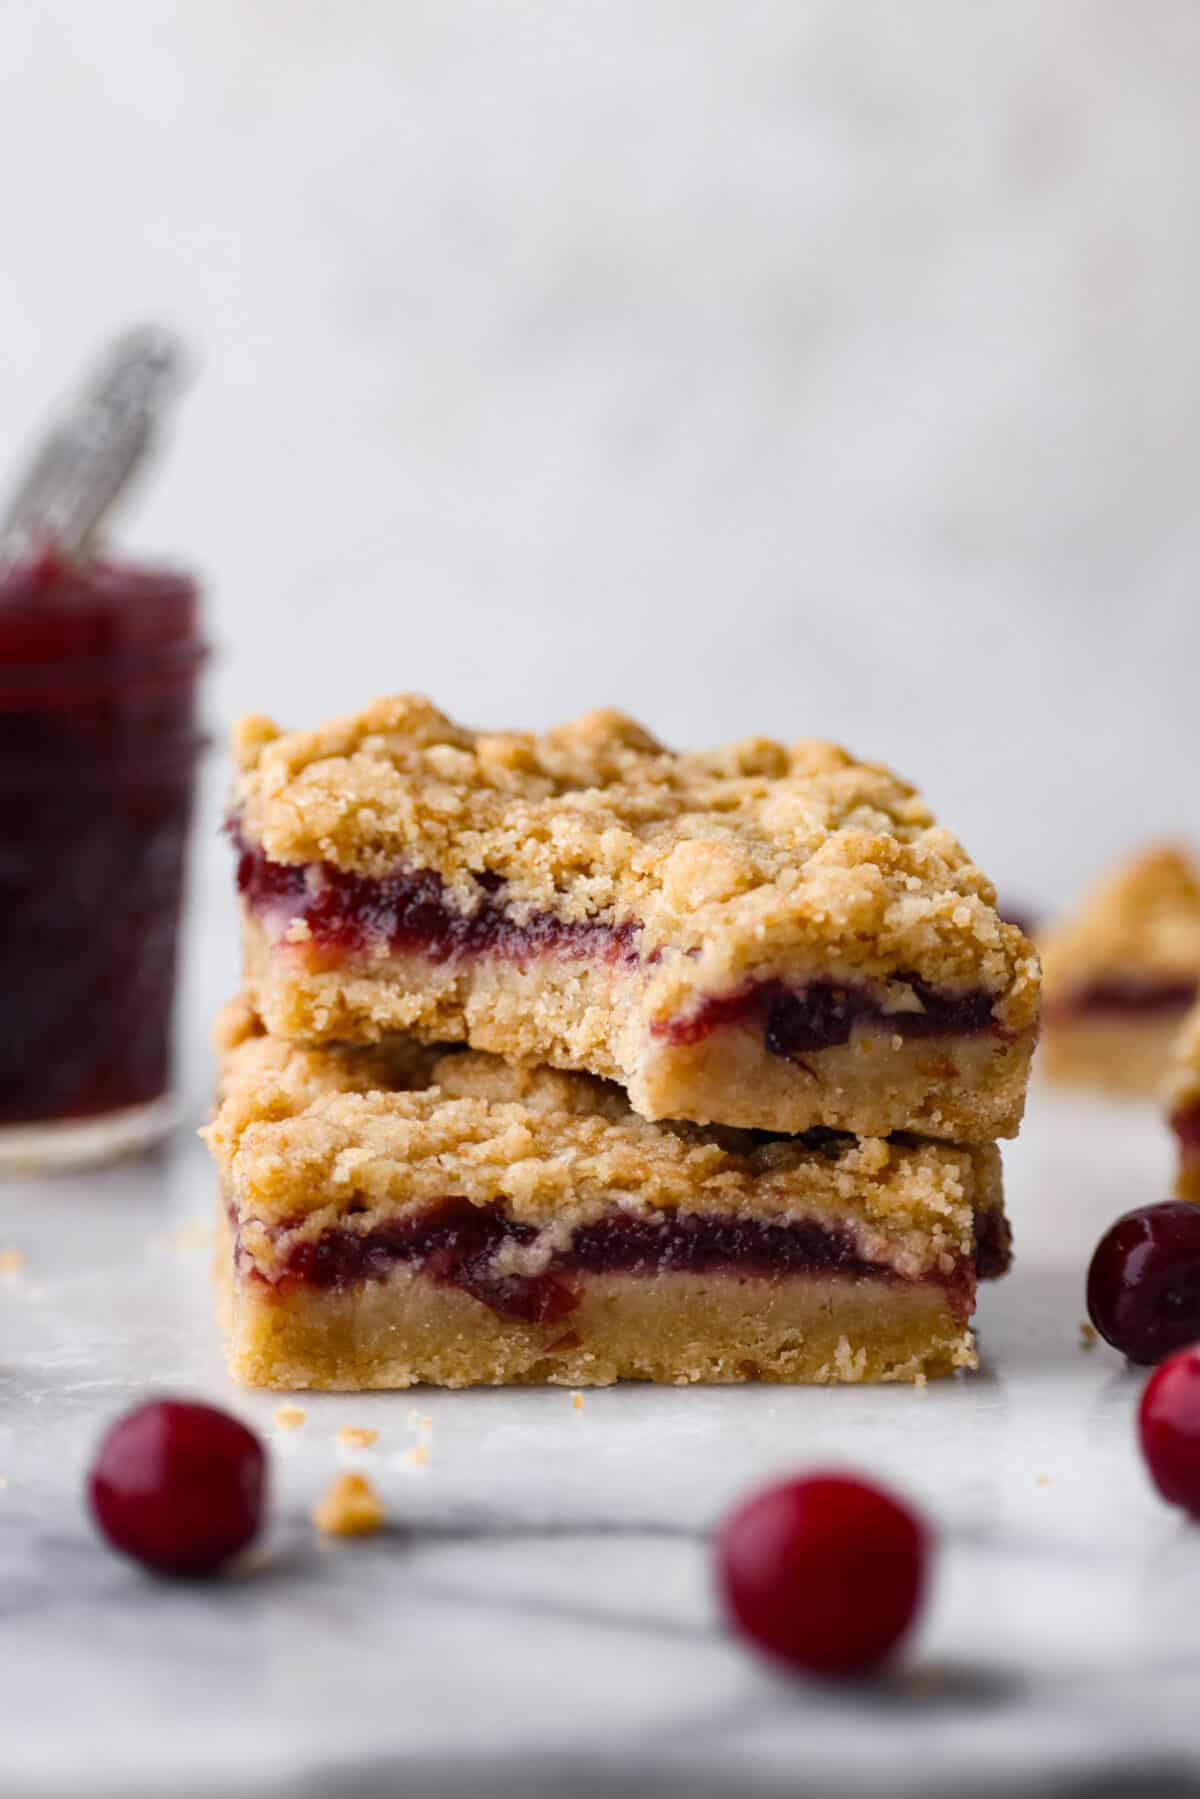 2 cranberry bars stacked on top of each other. One has a bite taken out of it.